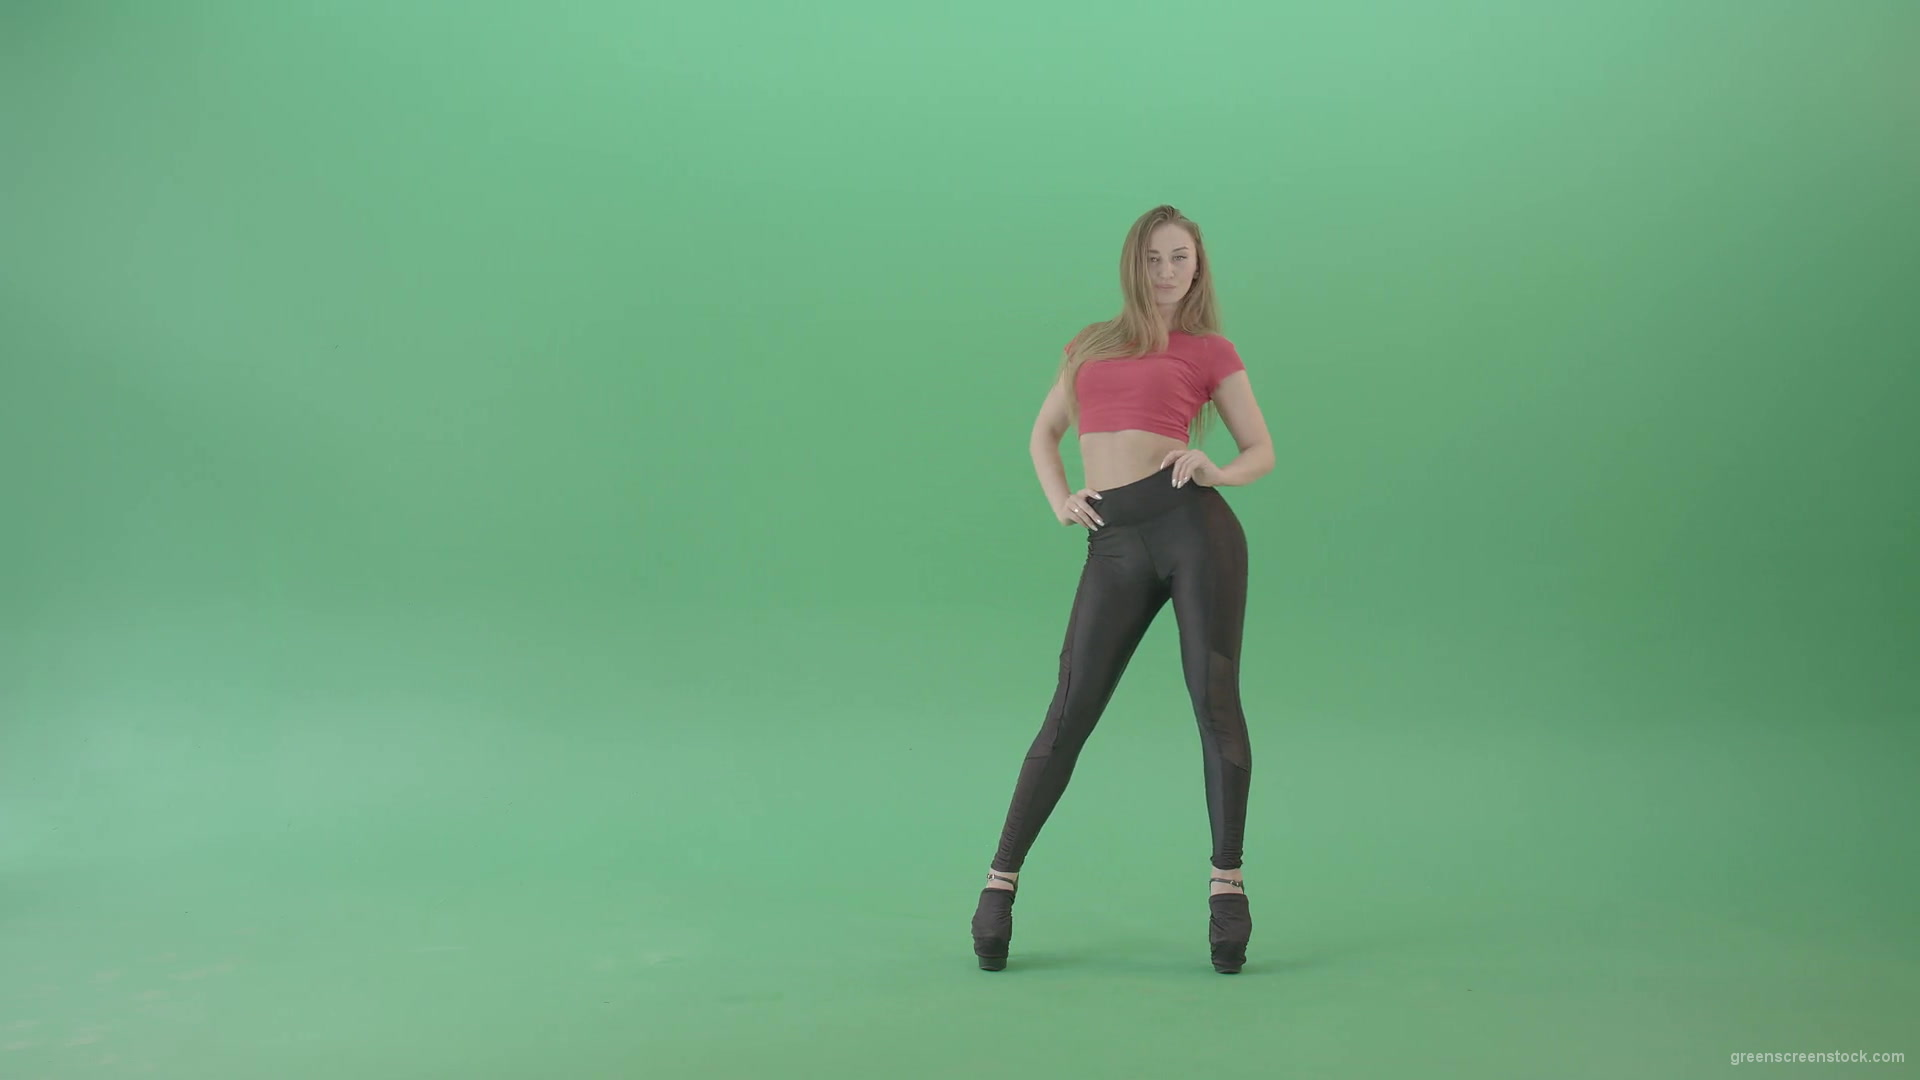 Sexy-Girl-posing-on-green-screen-in-red-t-shirt-4K-Video-Footage-1920_007 Green Screen Stock